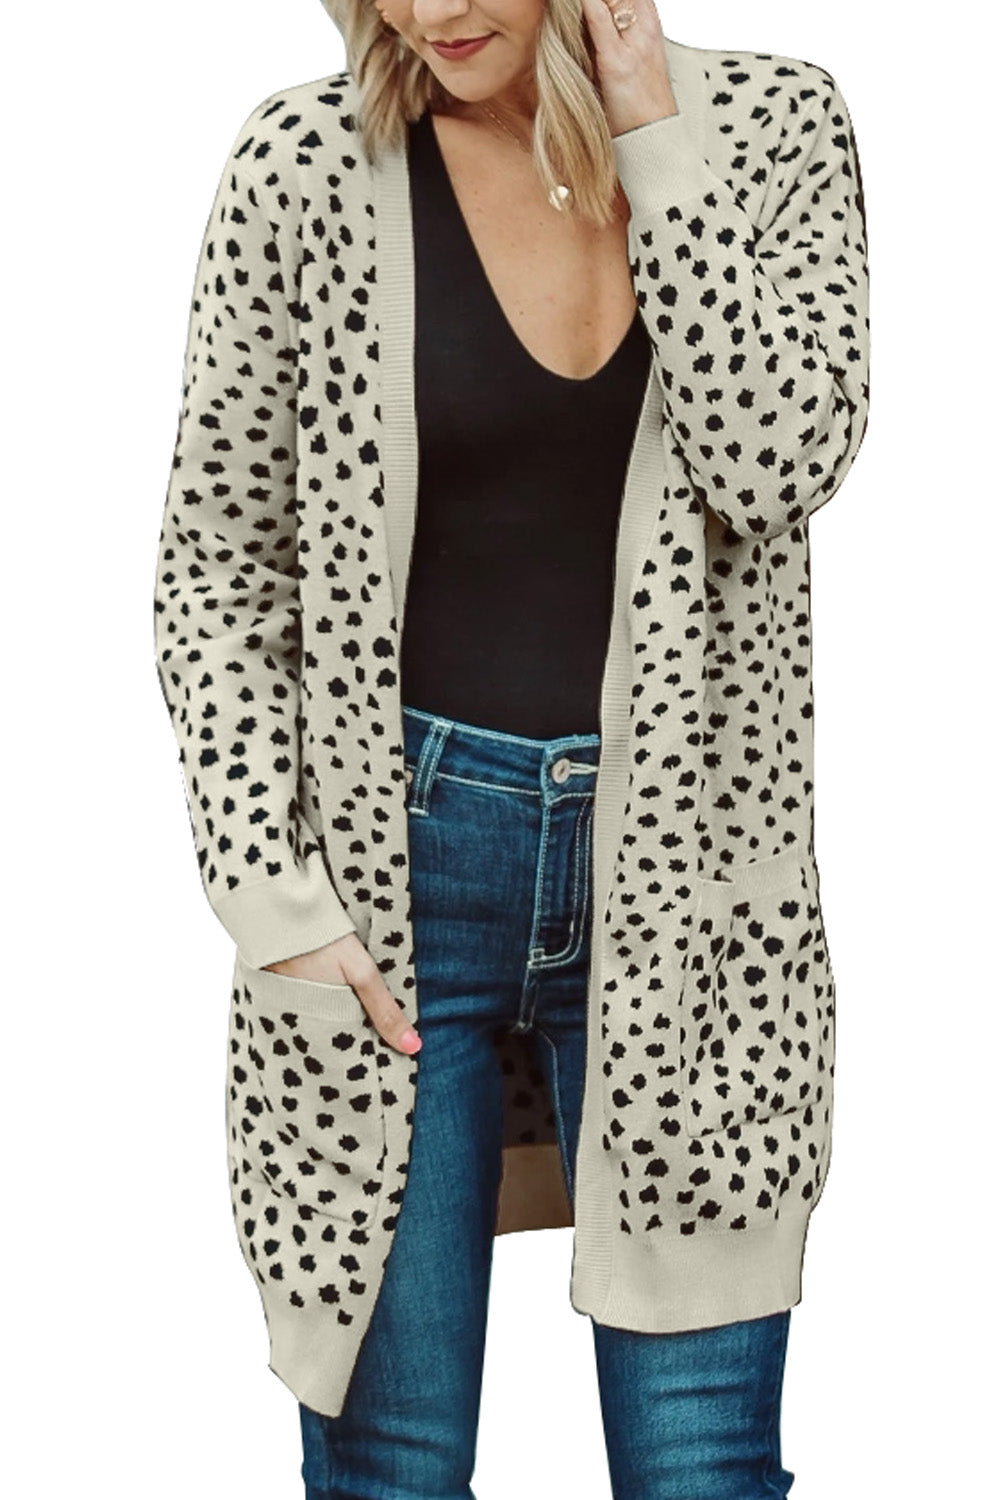 Apricot Open Front Dotted Print Knit Cardigan Sweaters & Cardigans JT's Designer Fashion